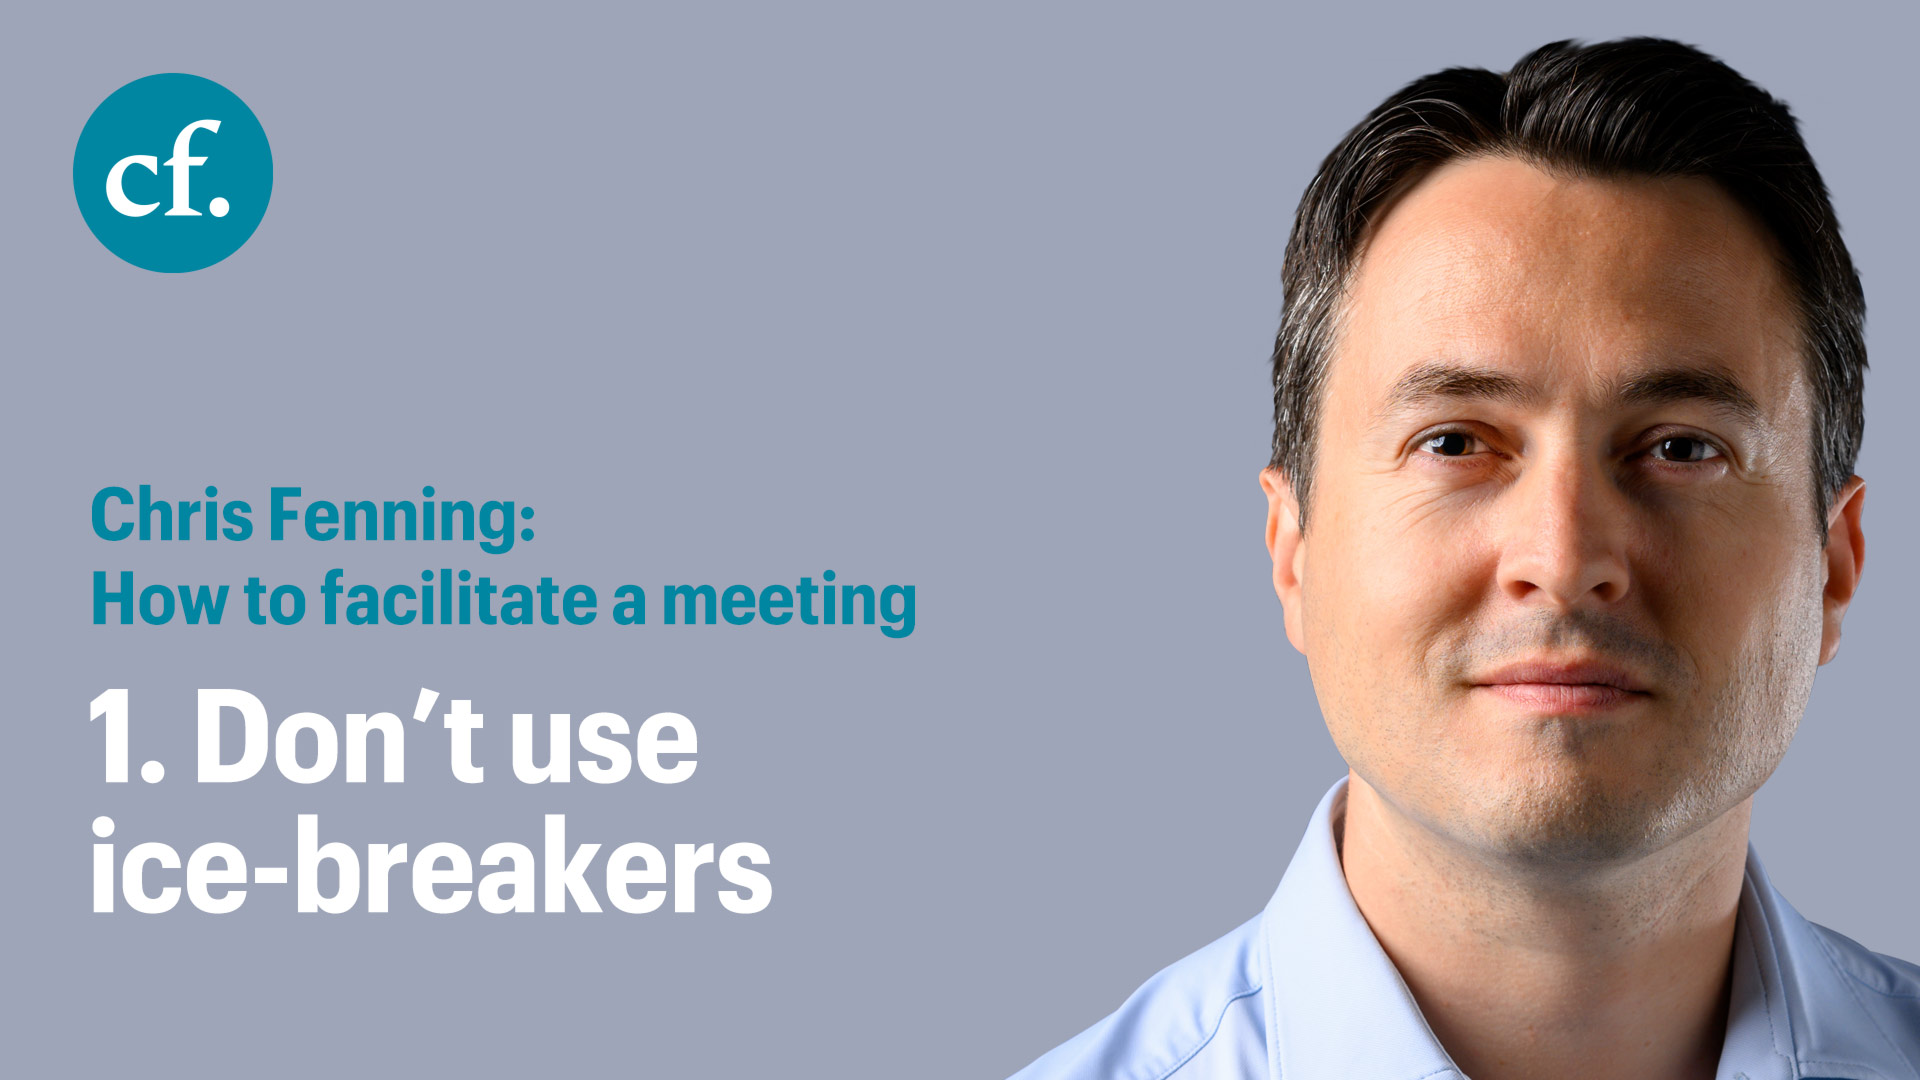 How to facilitate a meeting video with Chris Fenning